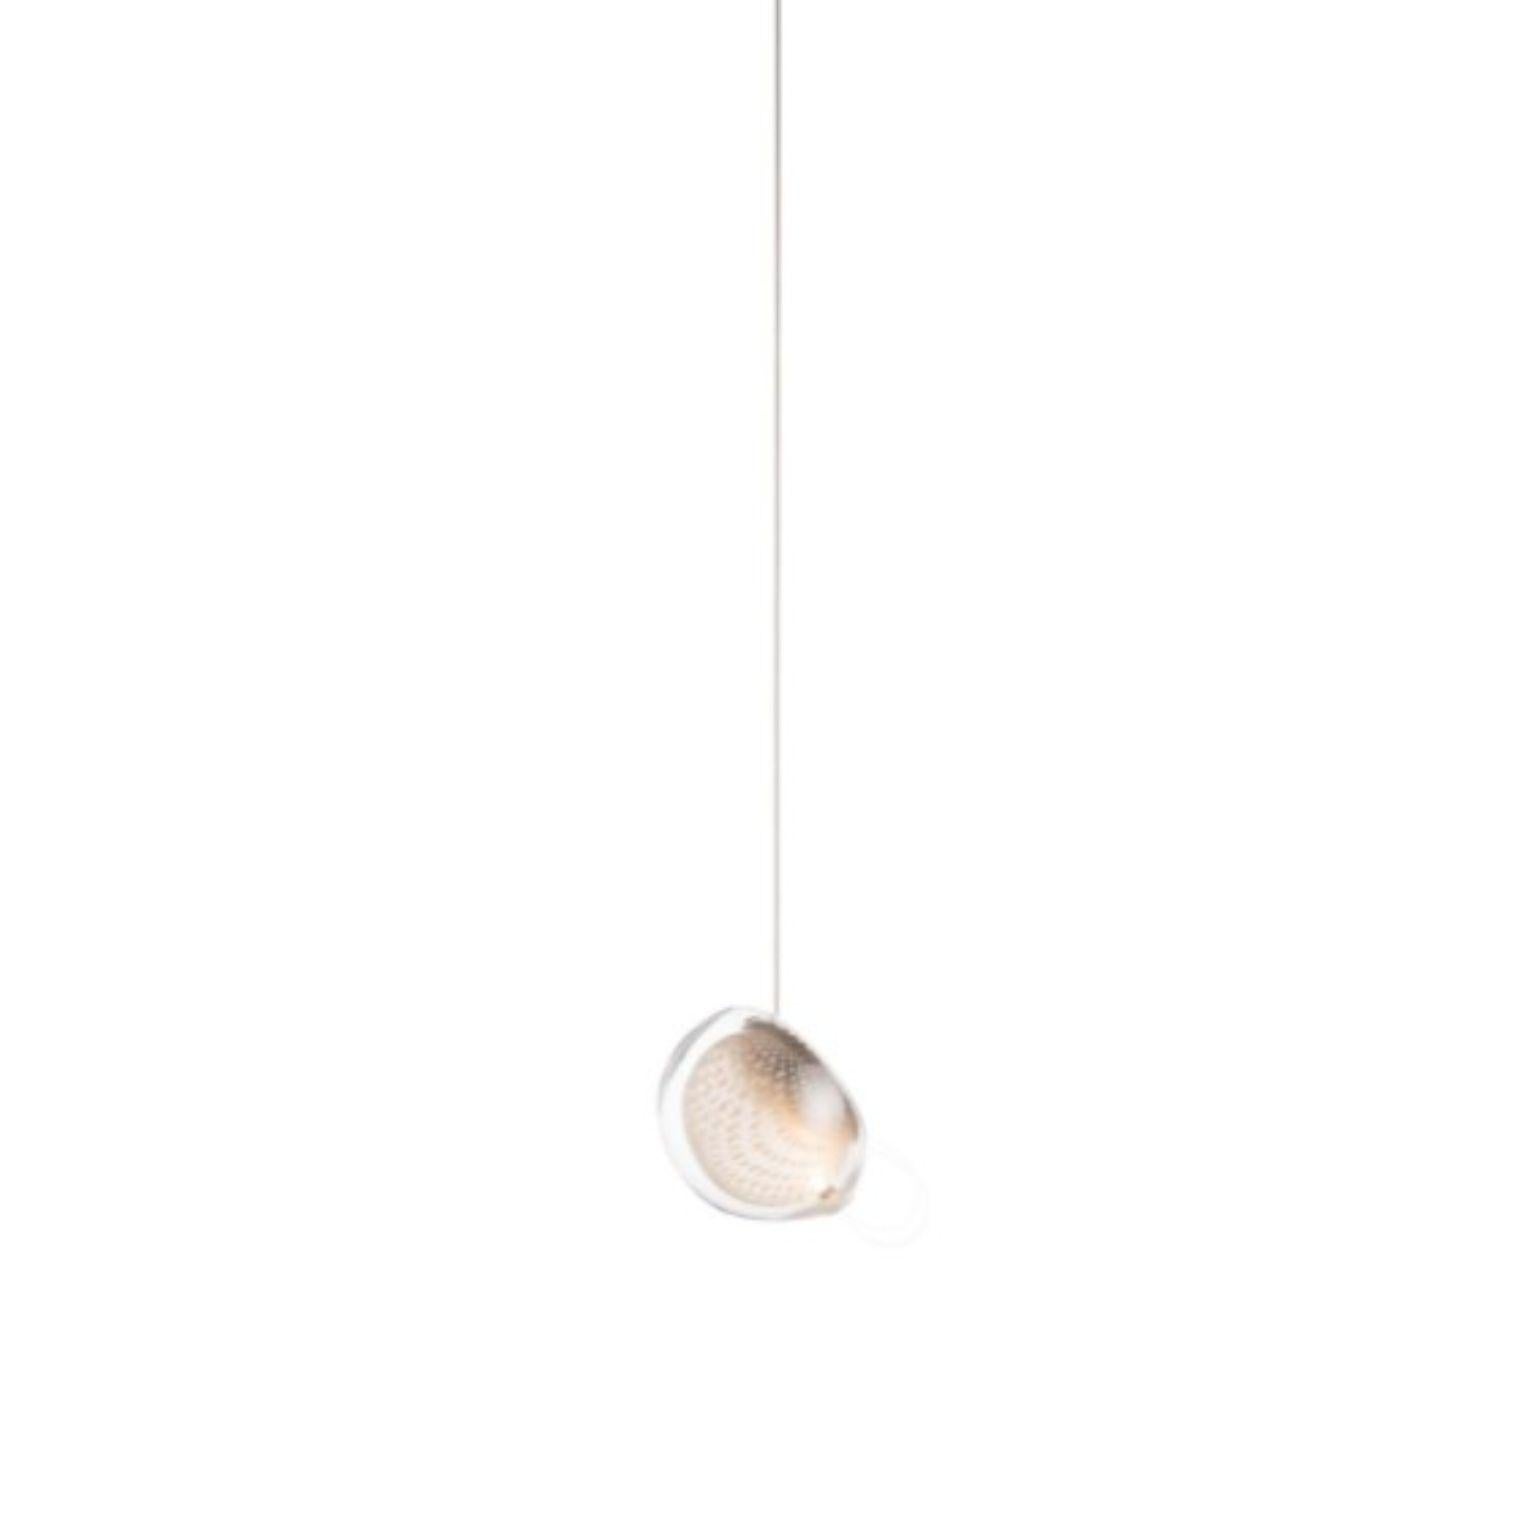 76.1 Pendant by Bocci
Dimensions: D11.6 x H300 cm
Materials: brushed nickel round canopy
Weight: 0.7 kg
Also available in different dimensions.

All our lamps can be wired according to each country. If sold to the USA it will be wired for the